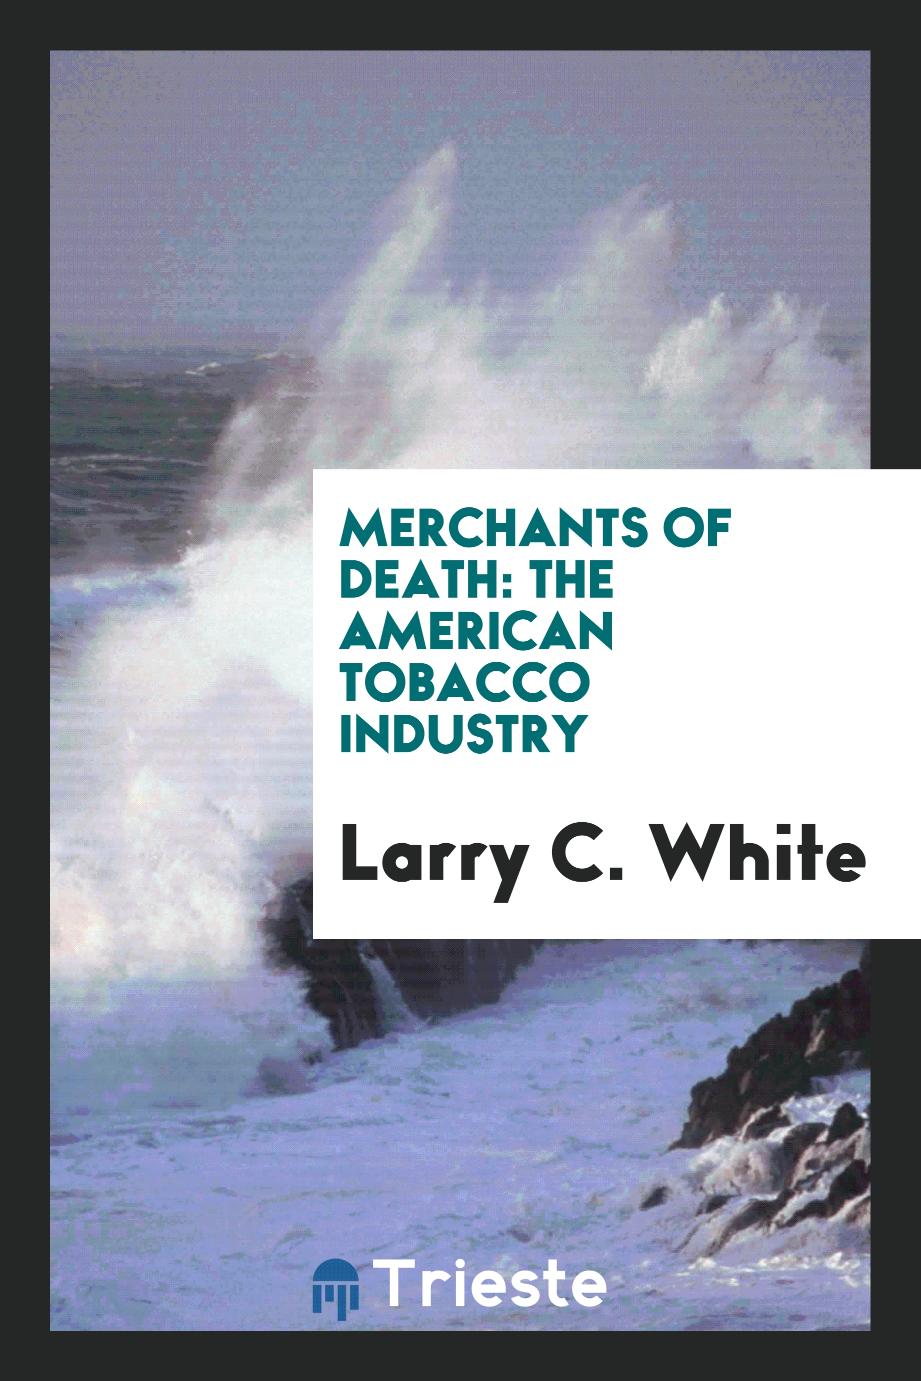 Larry C. White - Merchants of death: the American tobacco industry